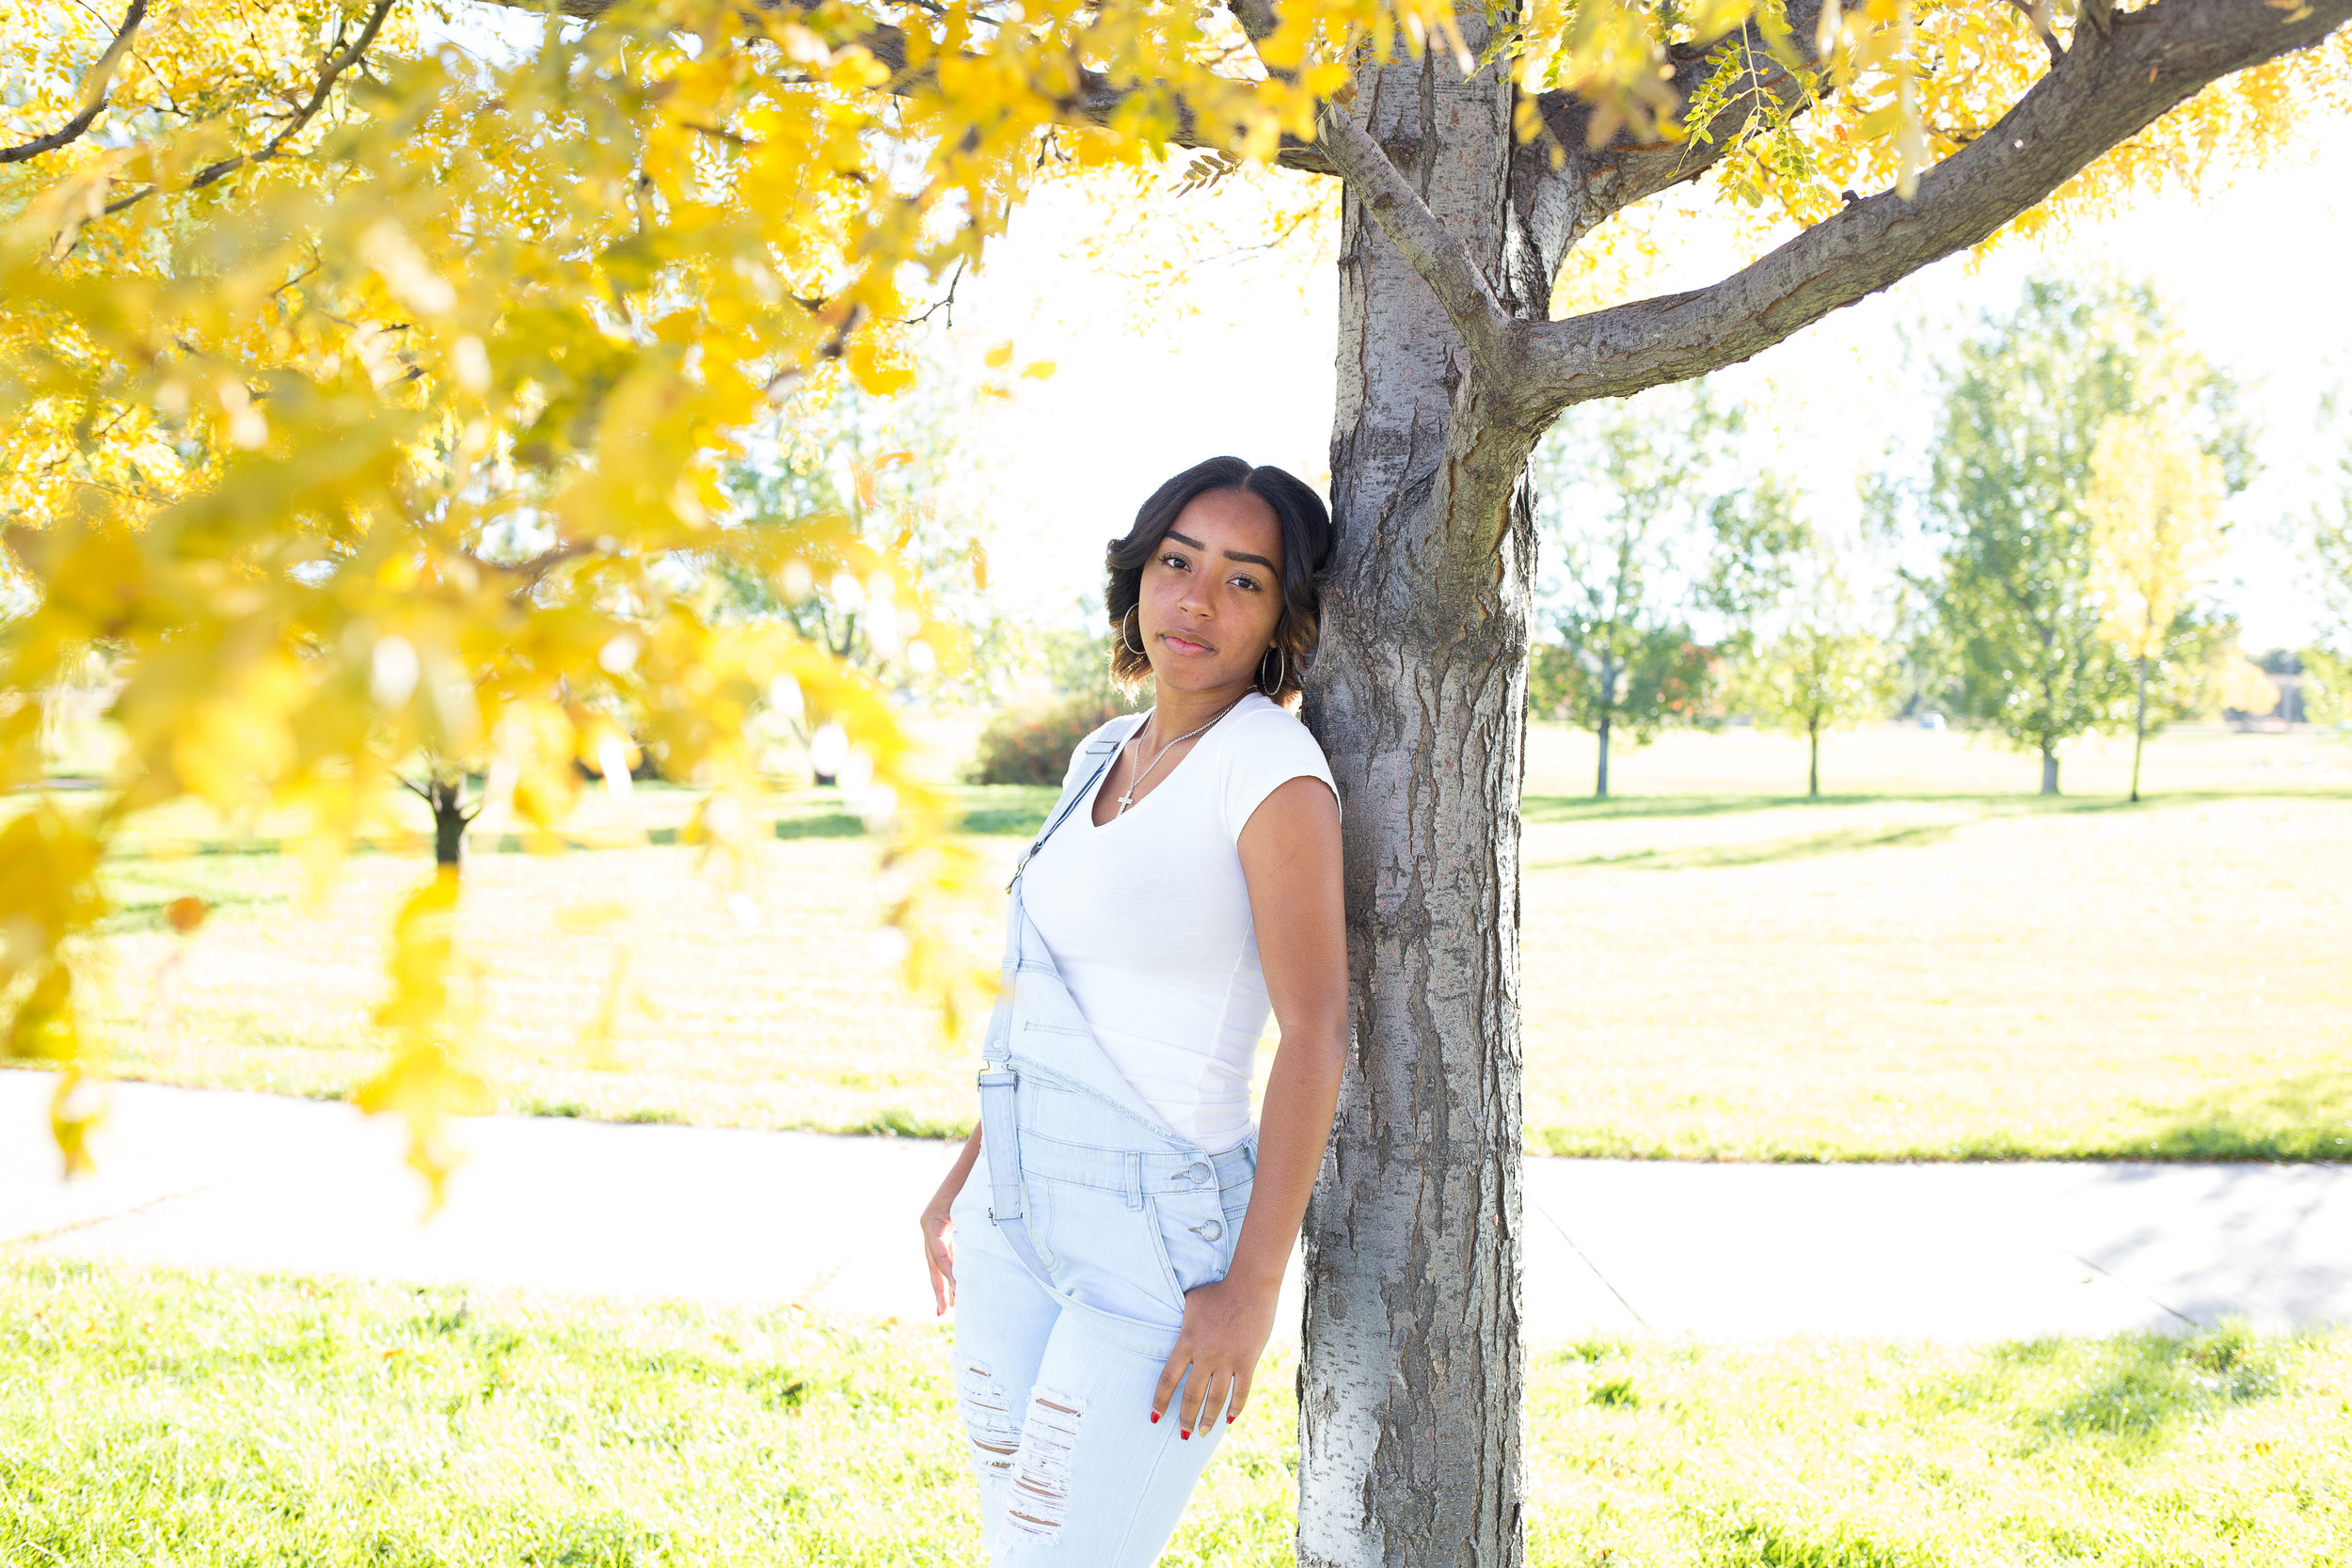 Girl leaning against tree with yellow leaves in the fall for her senior pictures at Fountain Creek Regional Park in Colorado Springs, CO. Stacy Carosa Photography